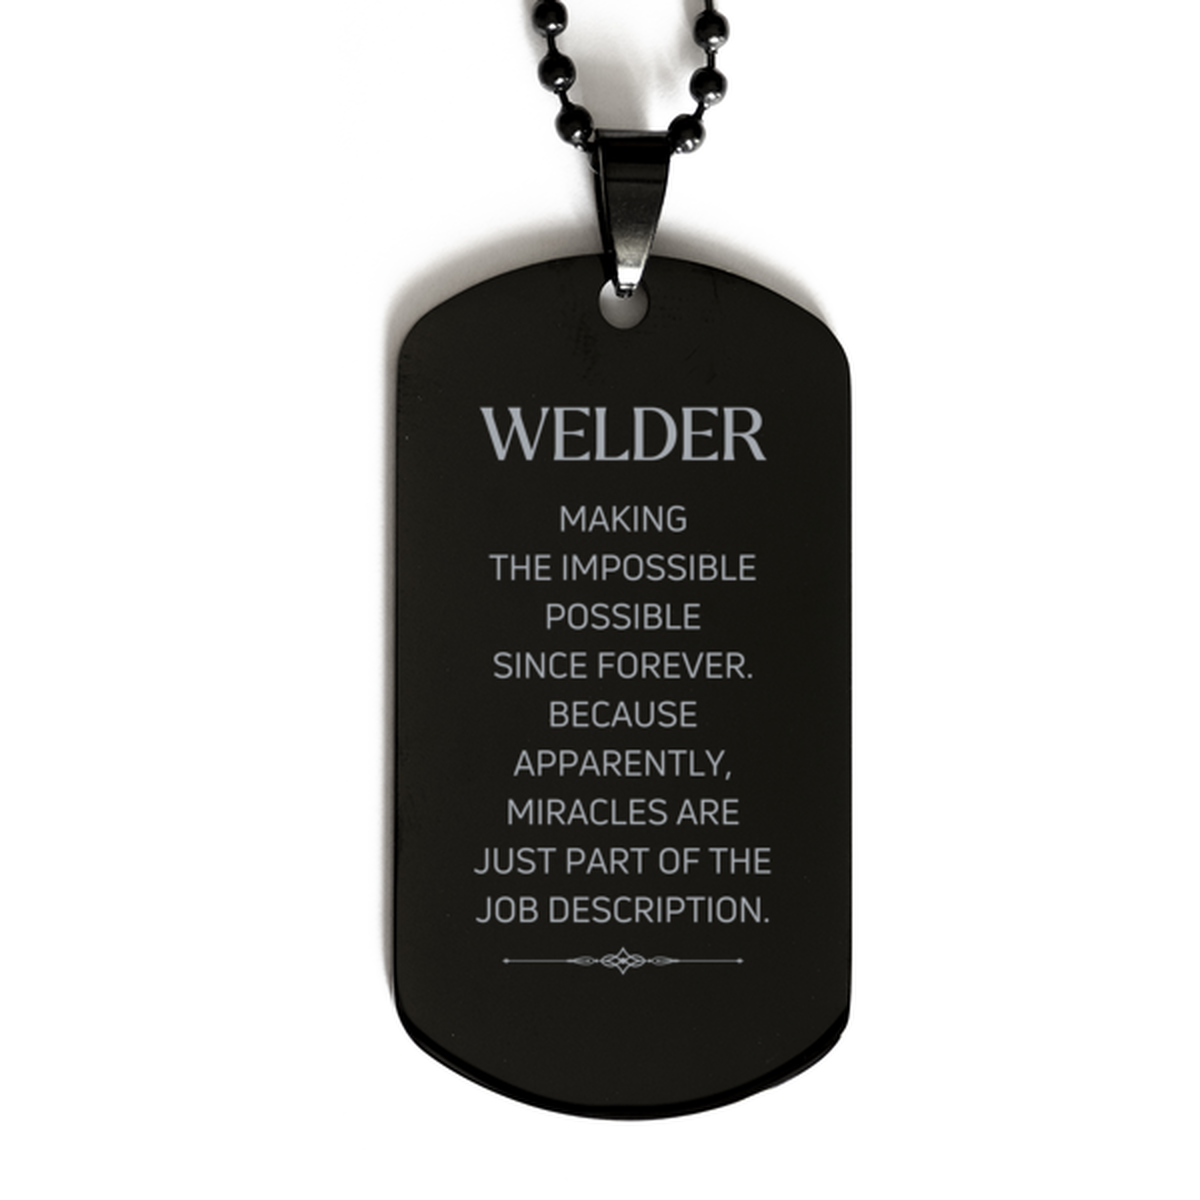 Funny Welder Gifts, Miracles are just part of the job description, Inspirational Birthday Black Dog Tag For Welder, Men, Women, Coworkers, Friends, Boss